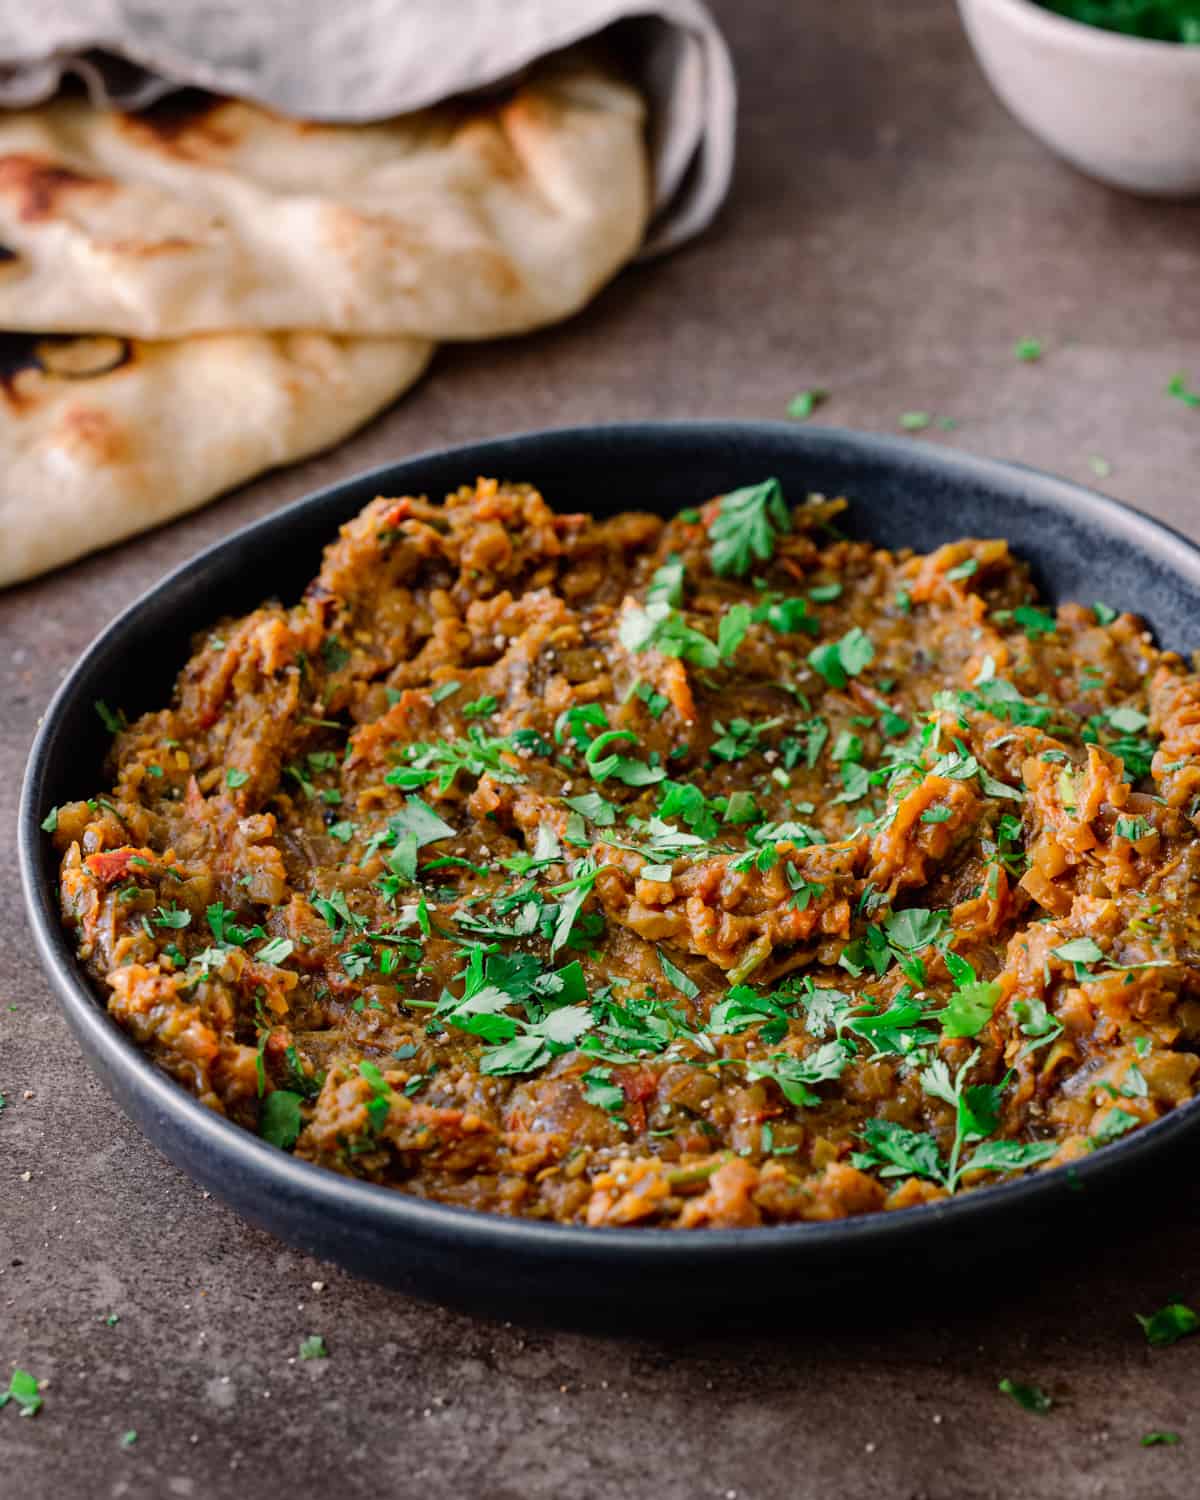 baingan bharta in a shallow bowl with naan in the background